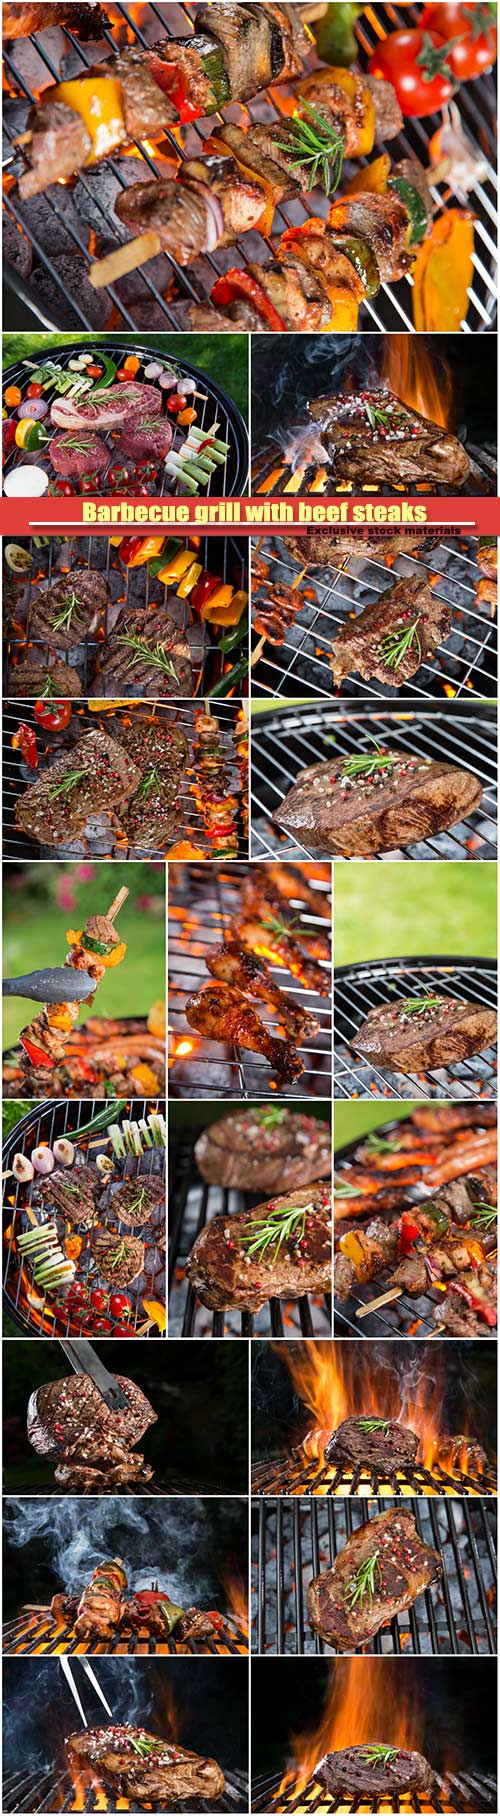 Barbecue grill with beef steaks and sea fishes